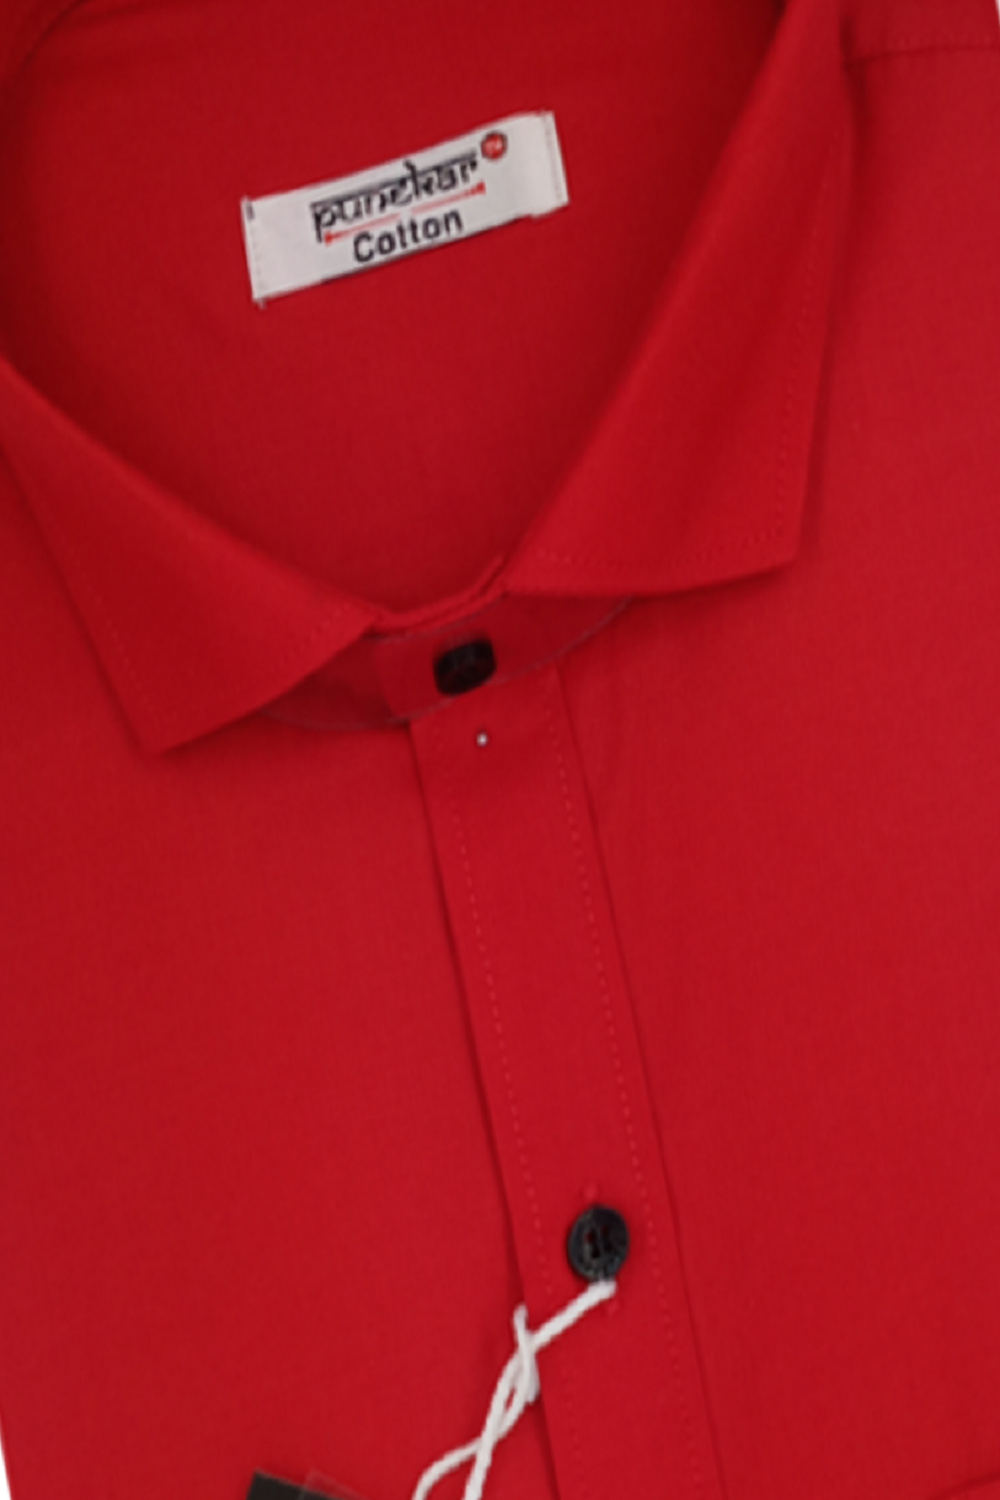 Cotton Tanmay Satin Red Color Full Sleeves Formal Shirt for Men's.